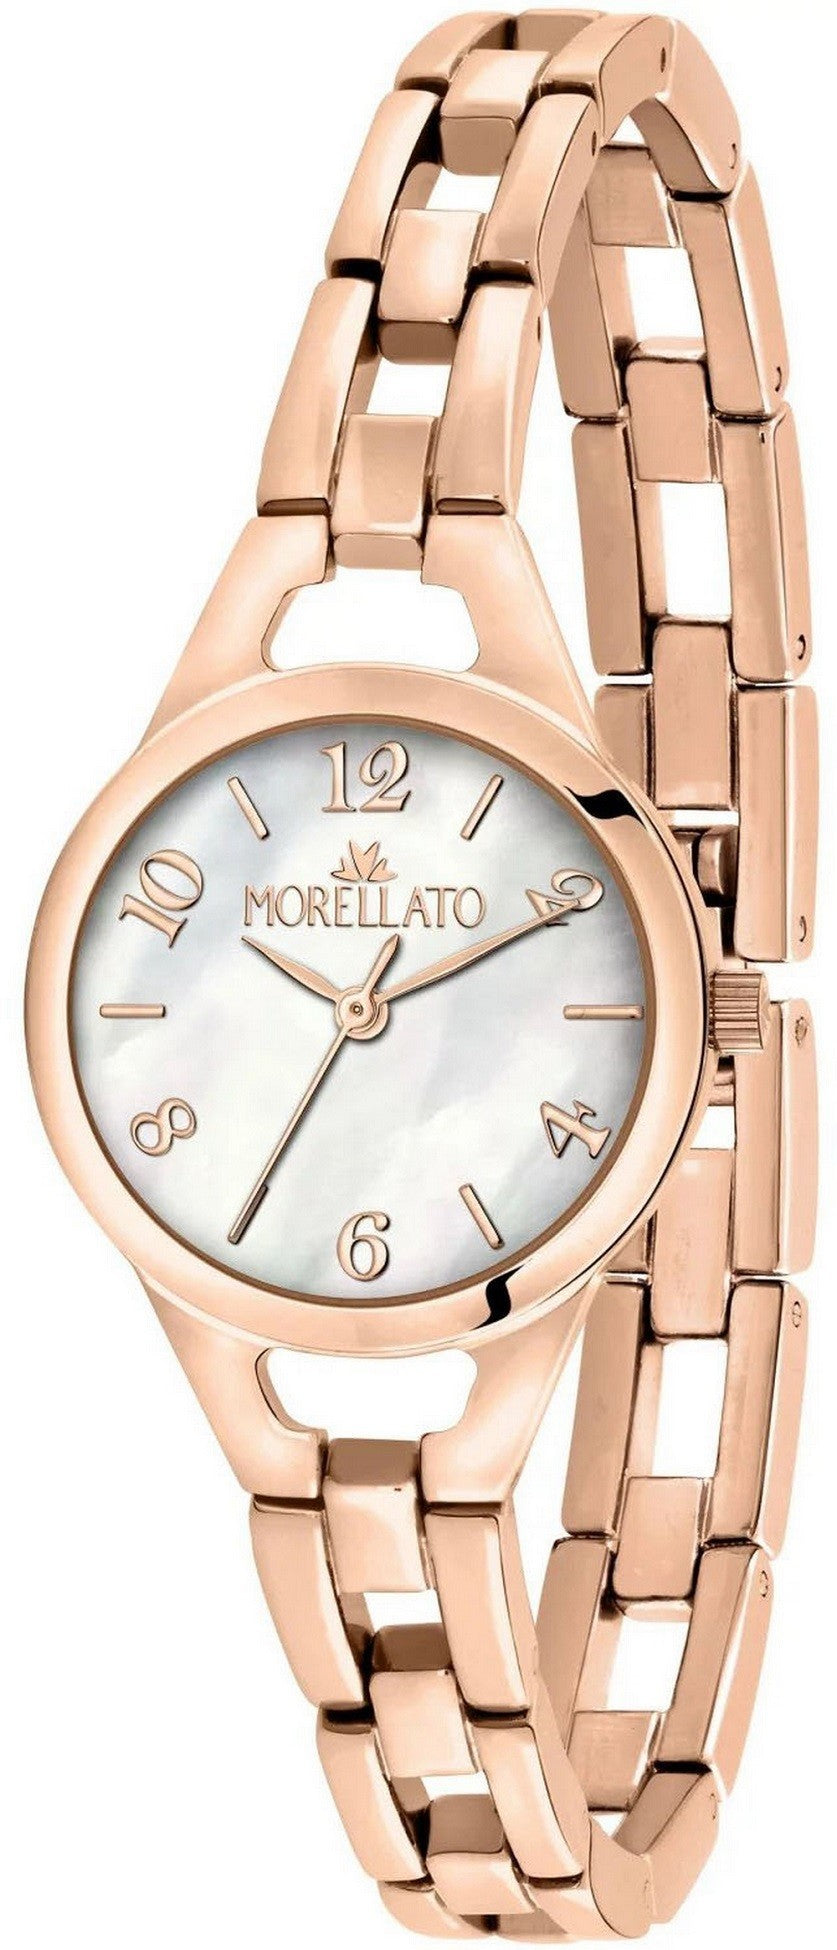 Morellato Girly Mother Of Pearl Dial Quartz R0153155501 Women's Watch